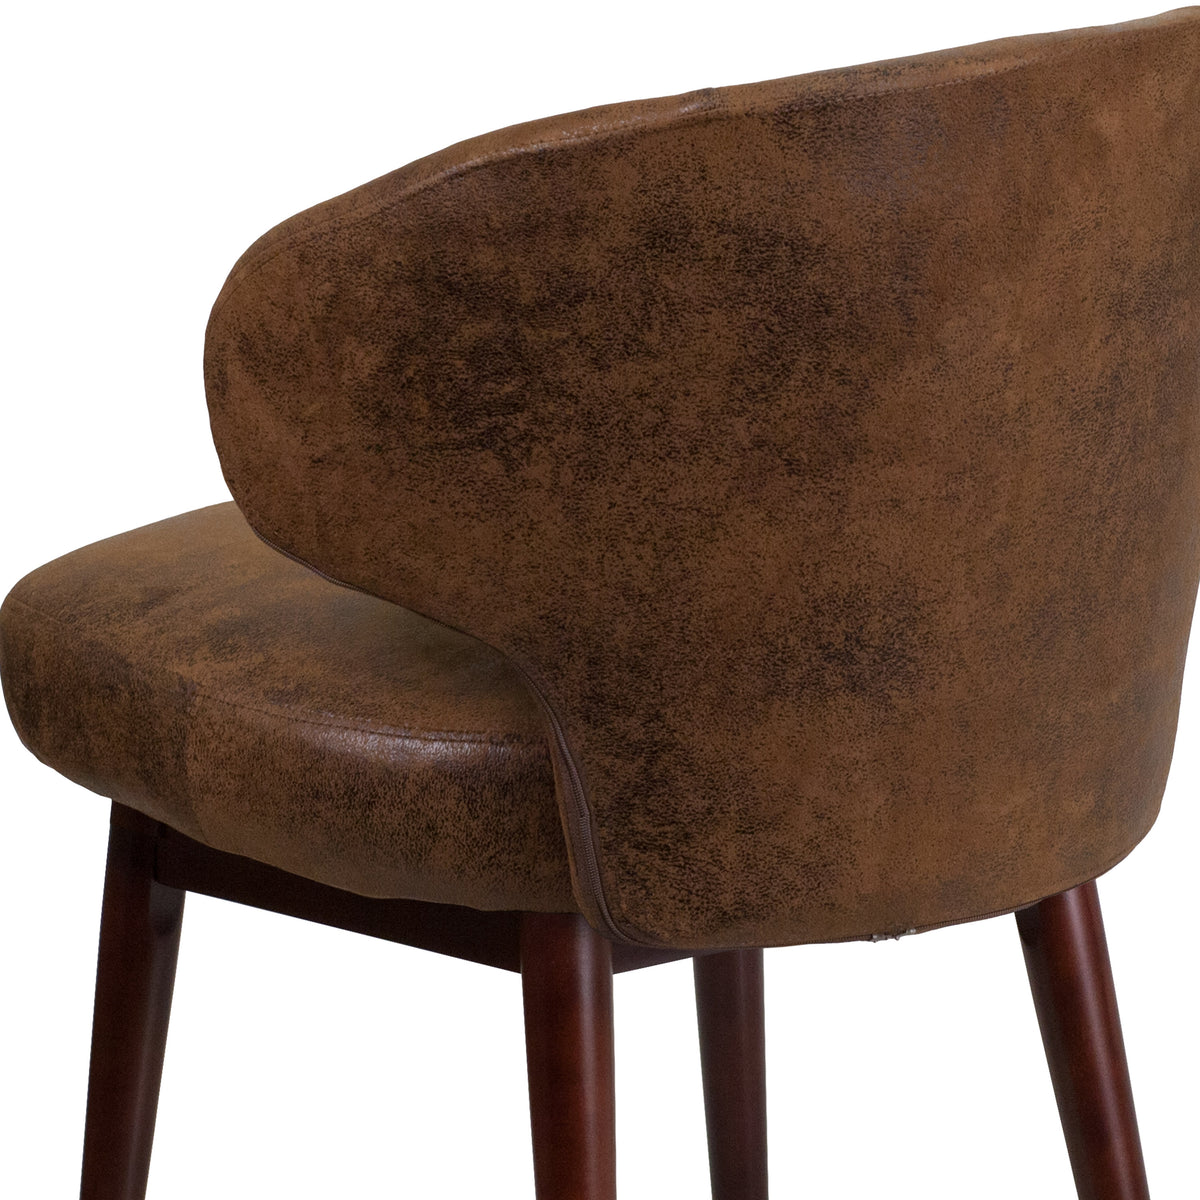 Bomber Jacket Microfiber |#| Bomber Jacket Microfiber Side Reception Chair with Walnut Legs and Curved Back